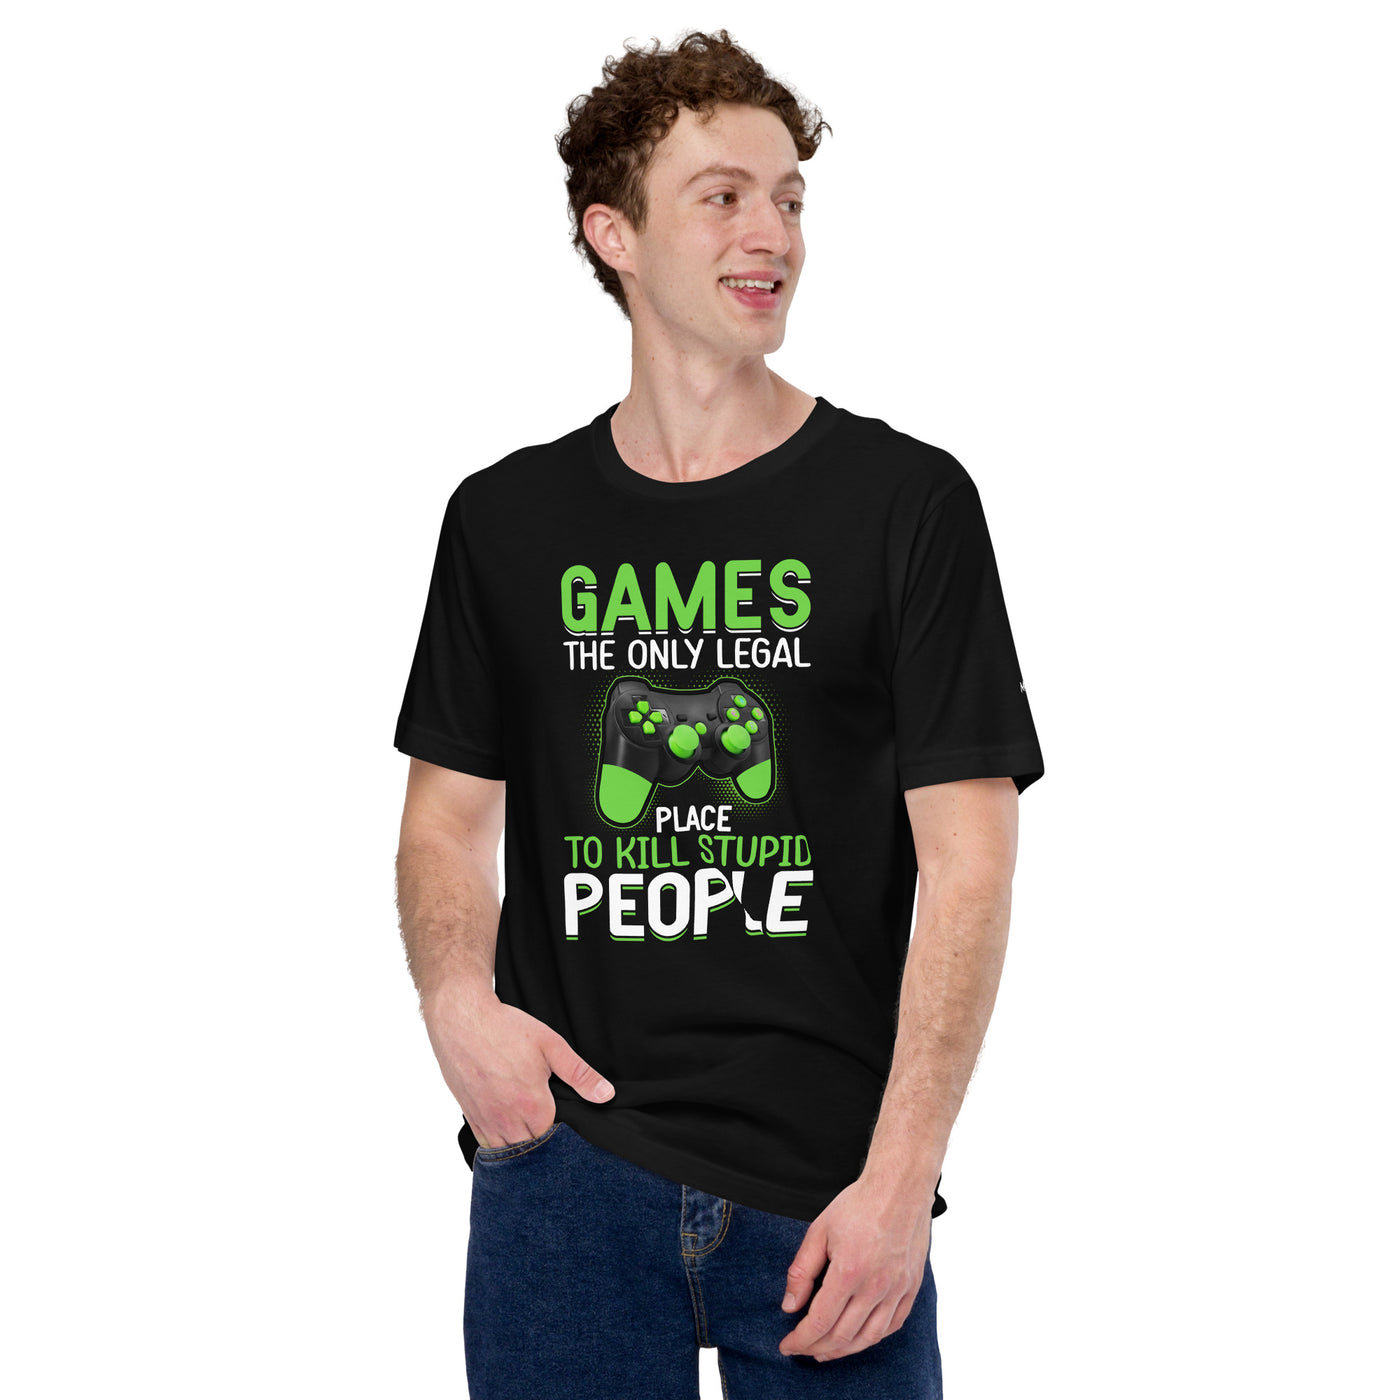 Games, the Only Legal Place to Kill Stupid People - Unisex t-shirt